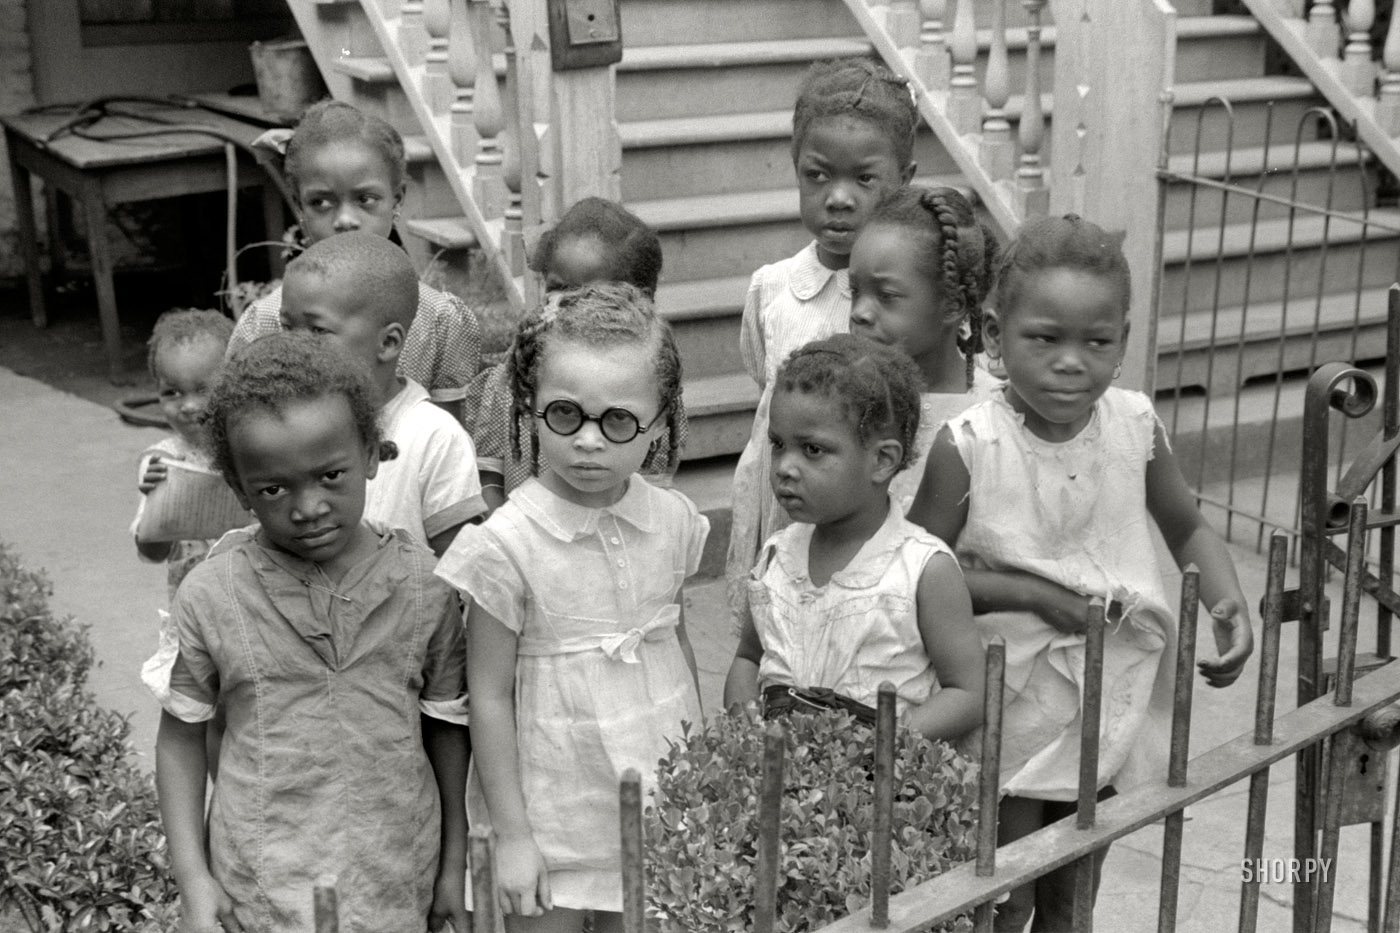 1940. No caption for these tots, on a roll of pictures taken in what looks like New Orleans. 35mm nitrate negative by John Vachon. View full size.